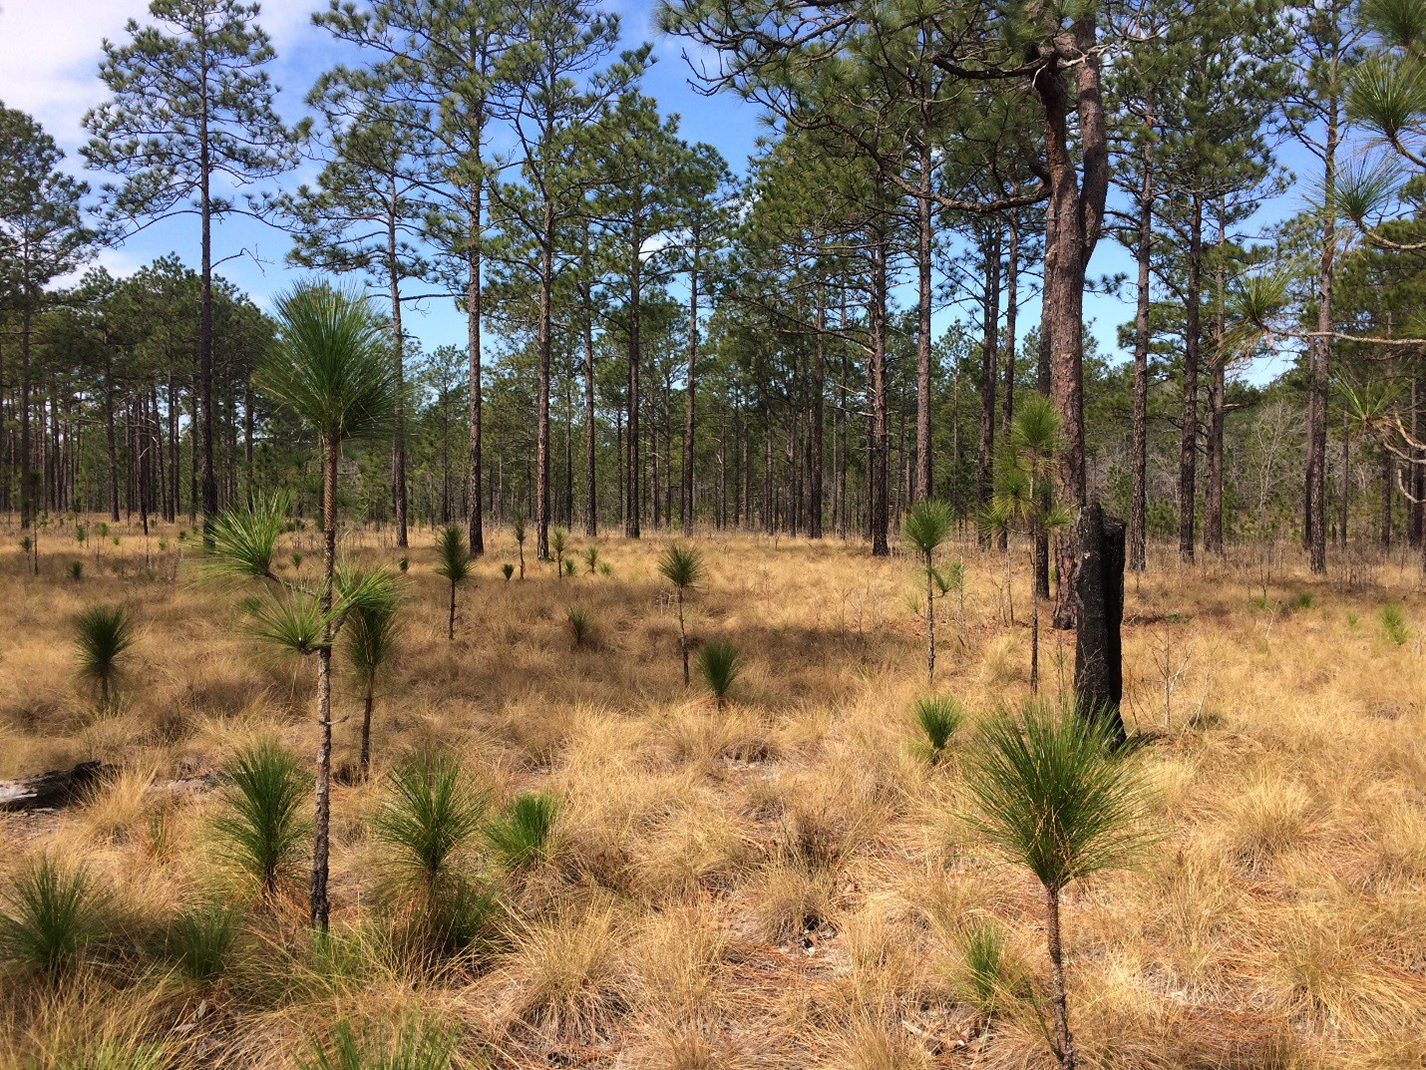 Forest floor is filled with longleaf pine seedlings in it's bushy tan form leaving the grass stage of growth.